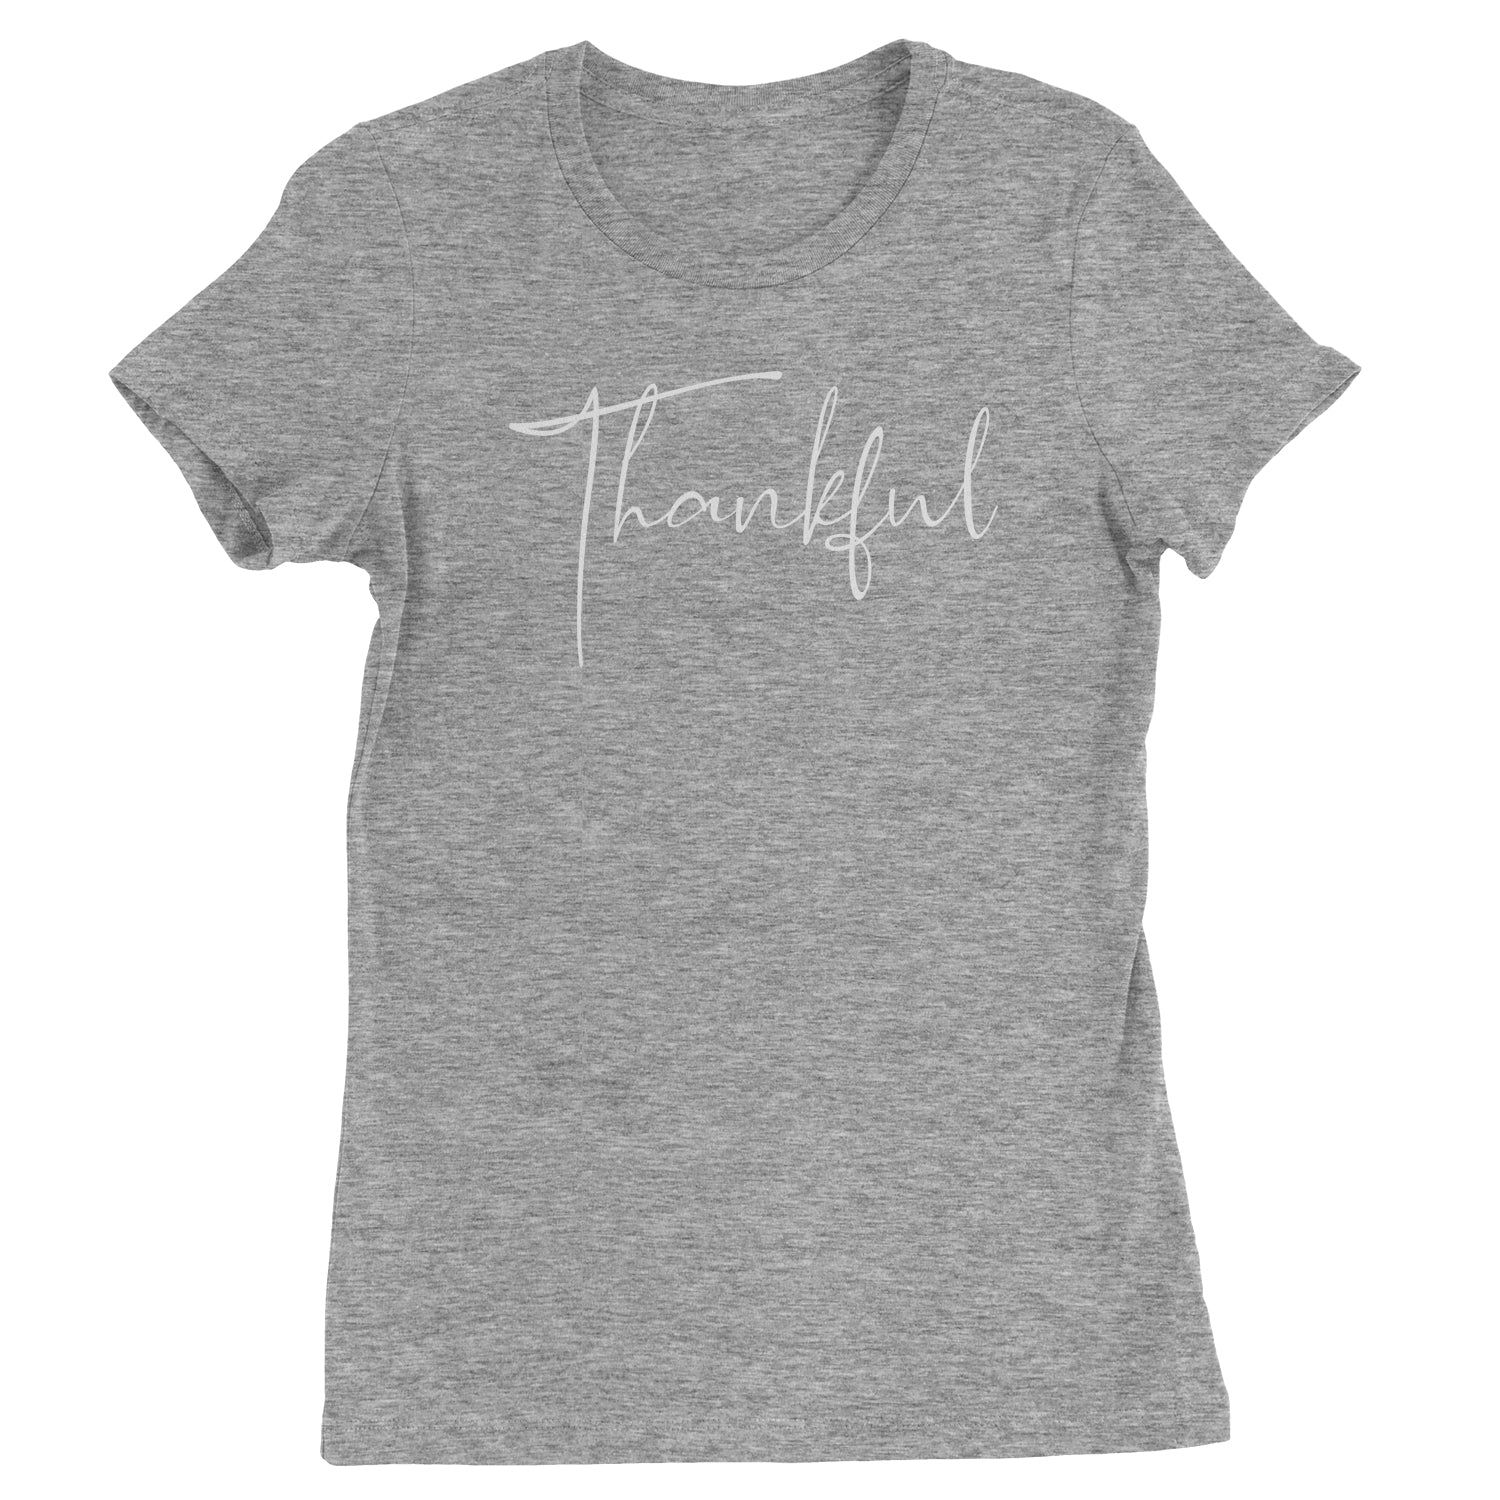 Thankful Womens T-shirt thanksgiving by Expression Tees